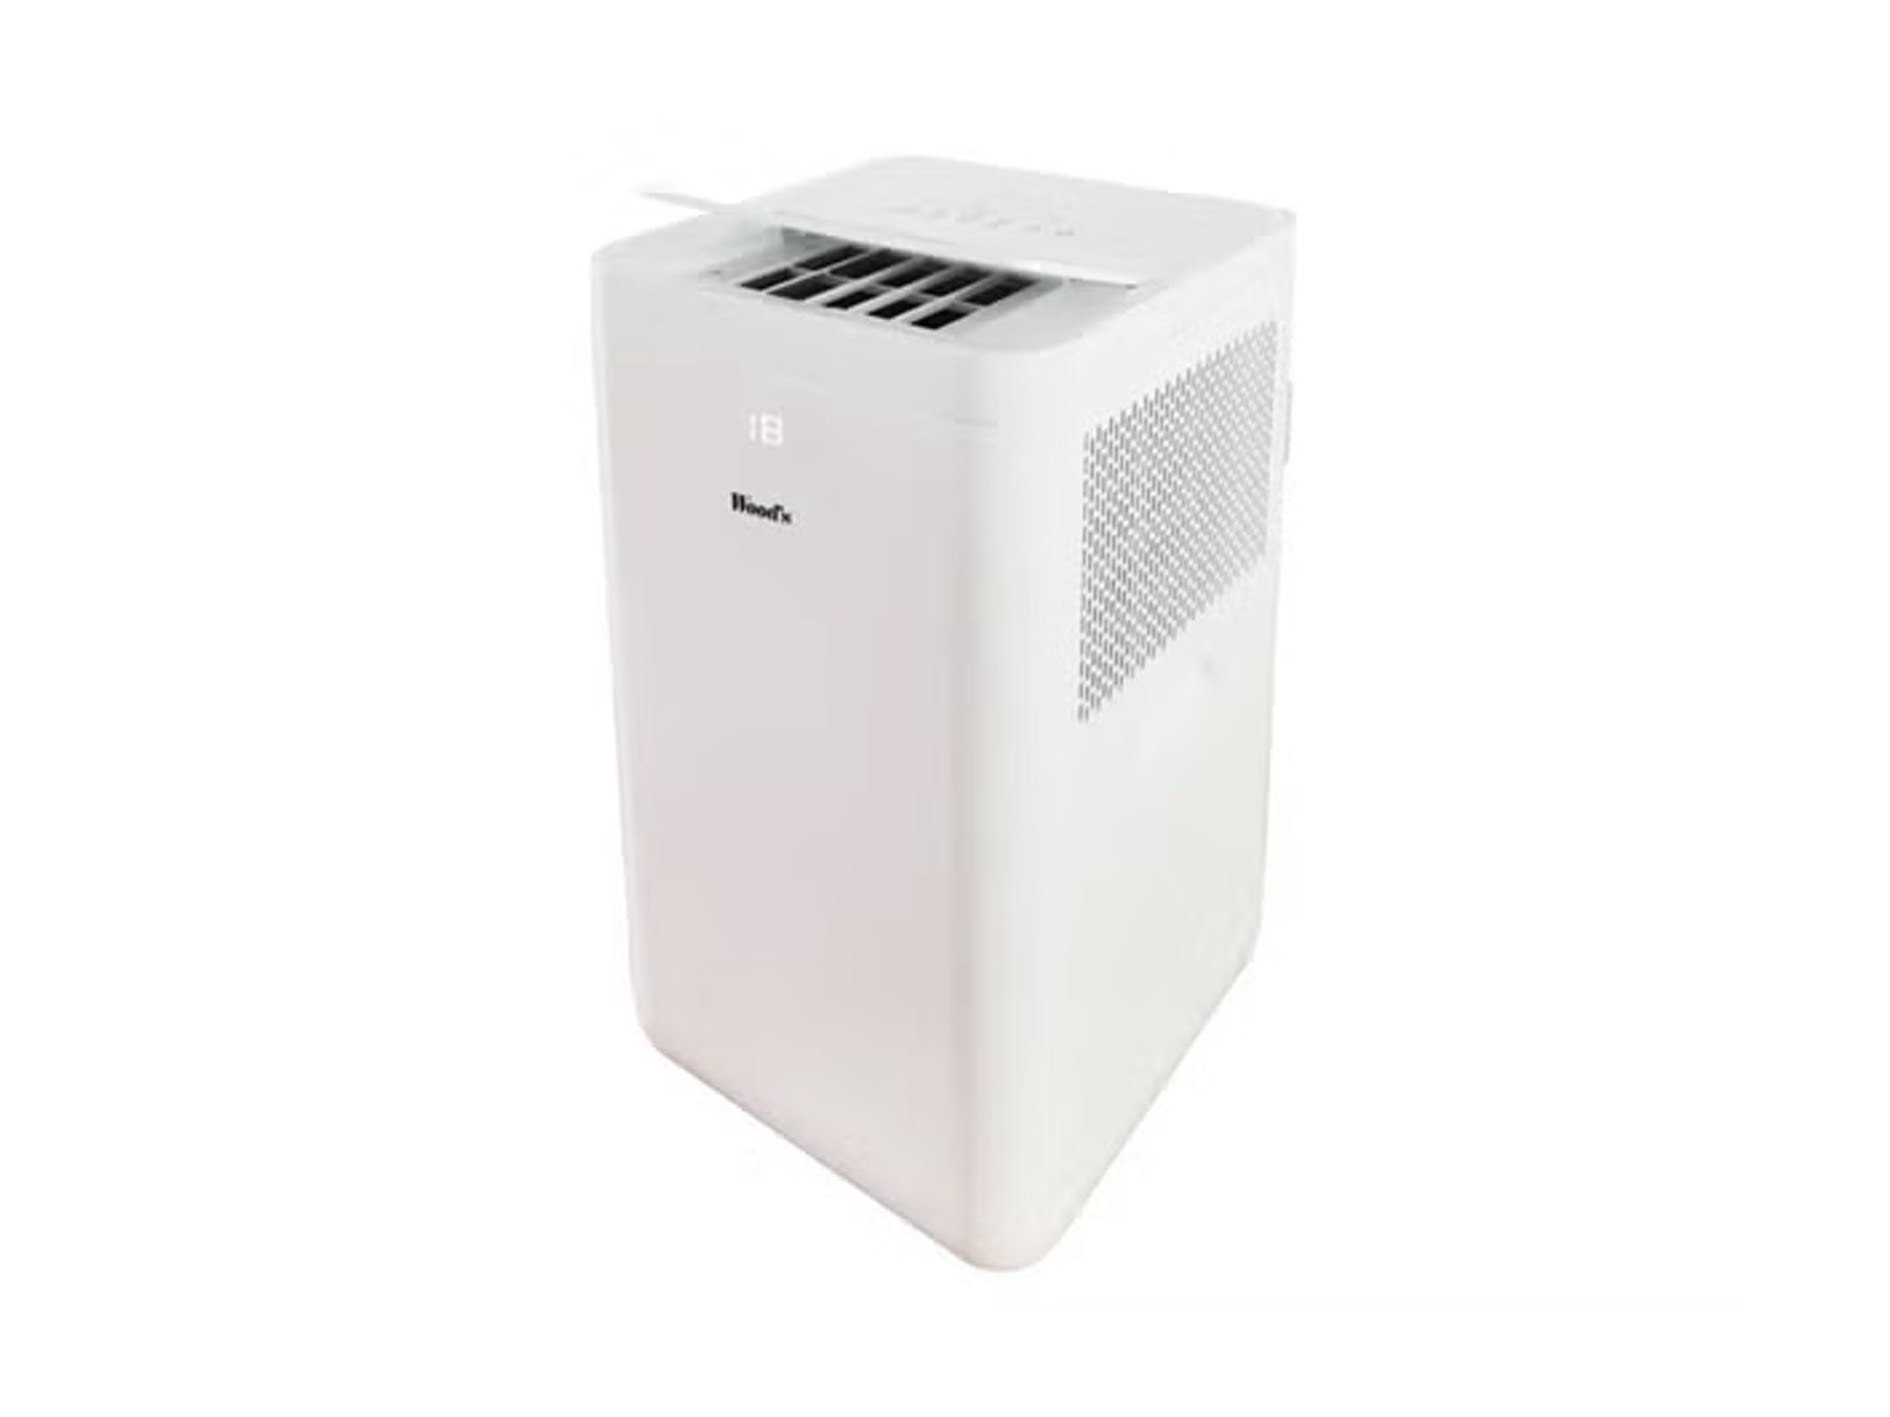 Woods Milan 7K wifi, best portable air conditioner